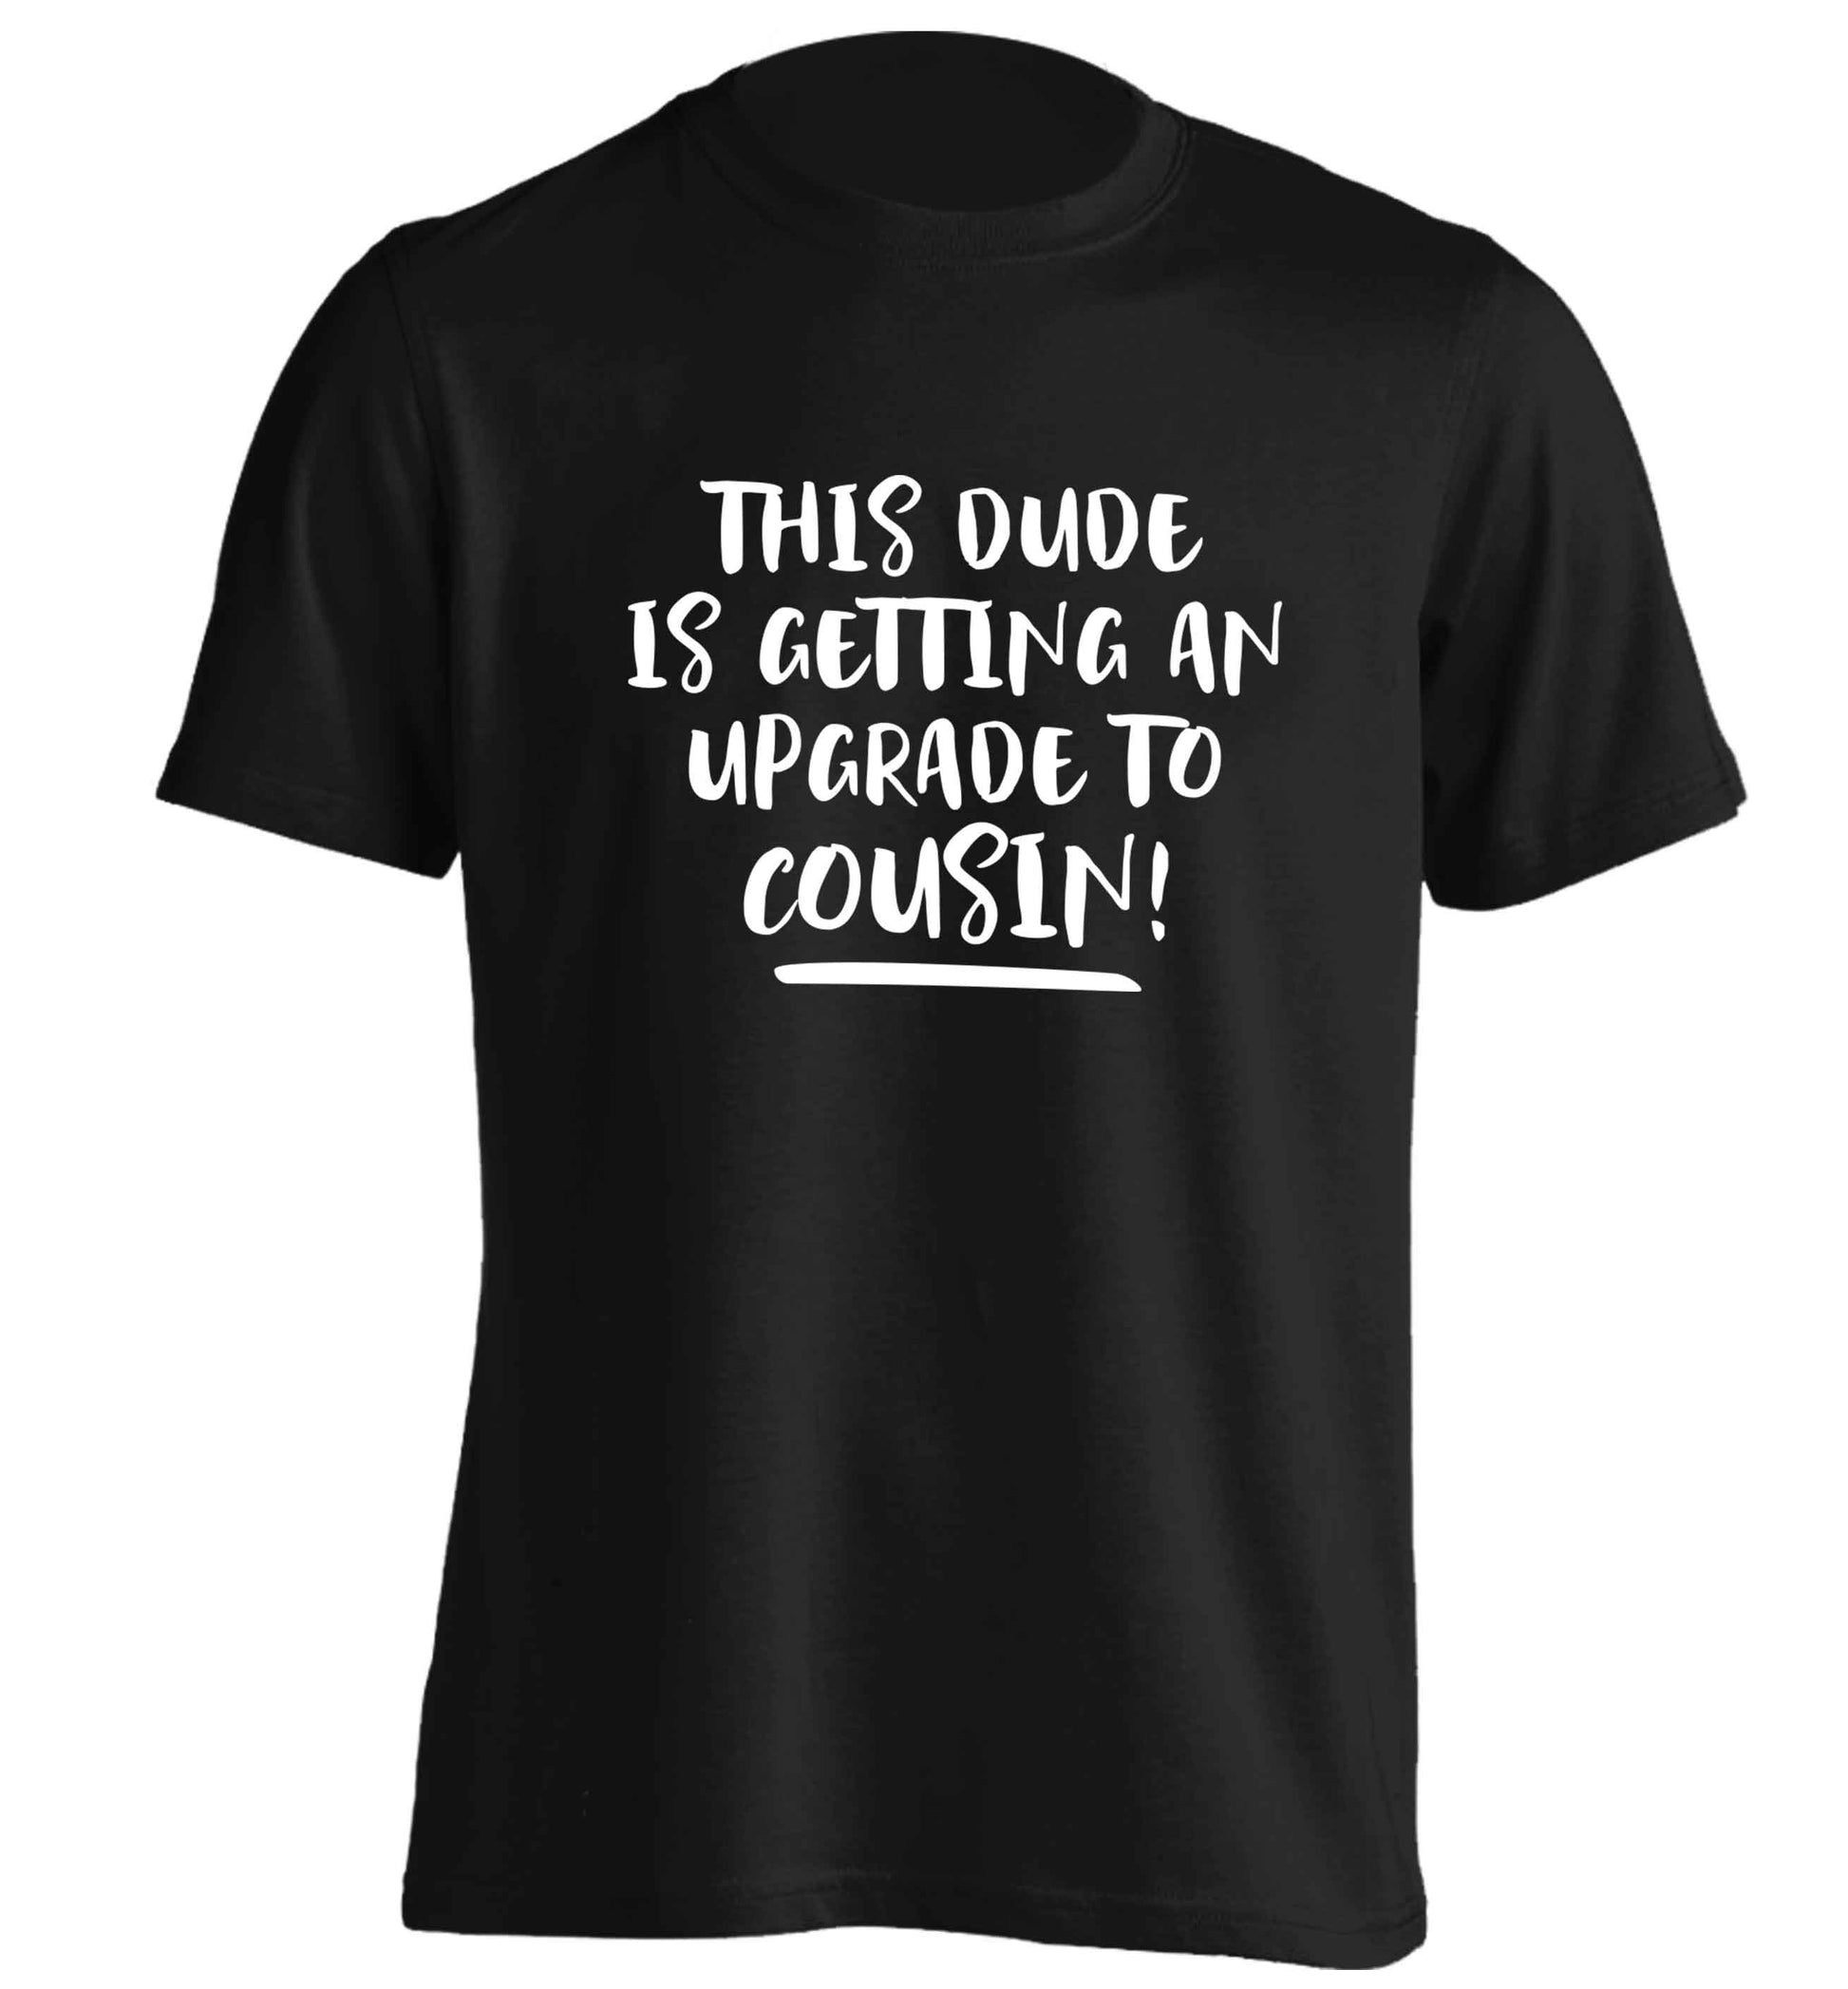 This dude is getting an upgrade to cousin! adults unisex black Tshirt 2XL